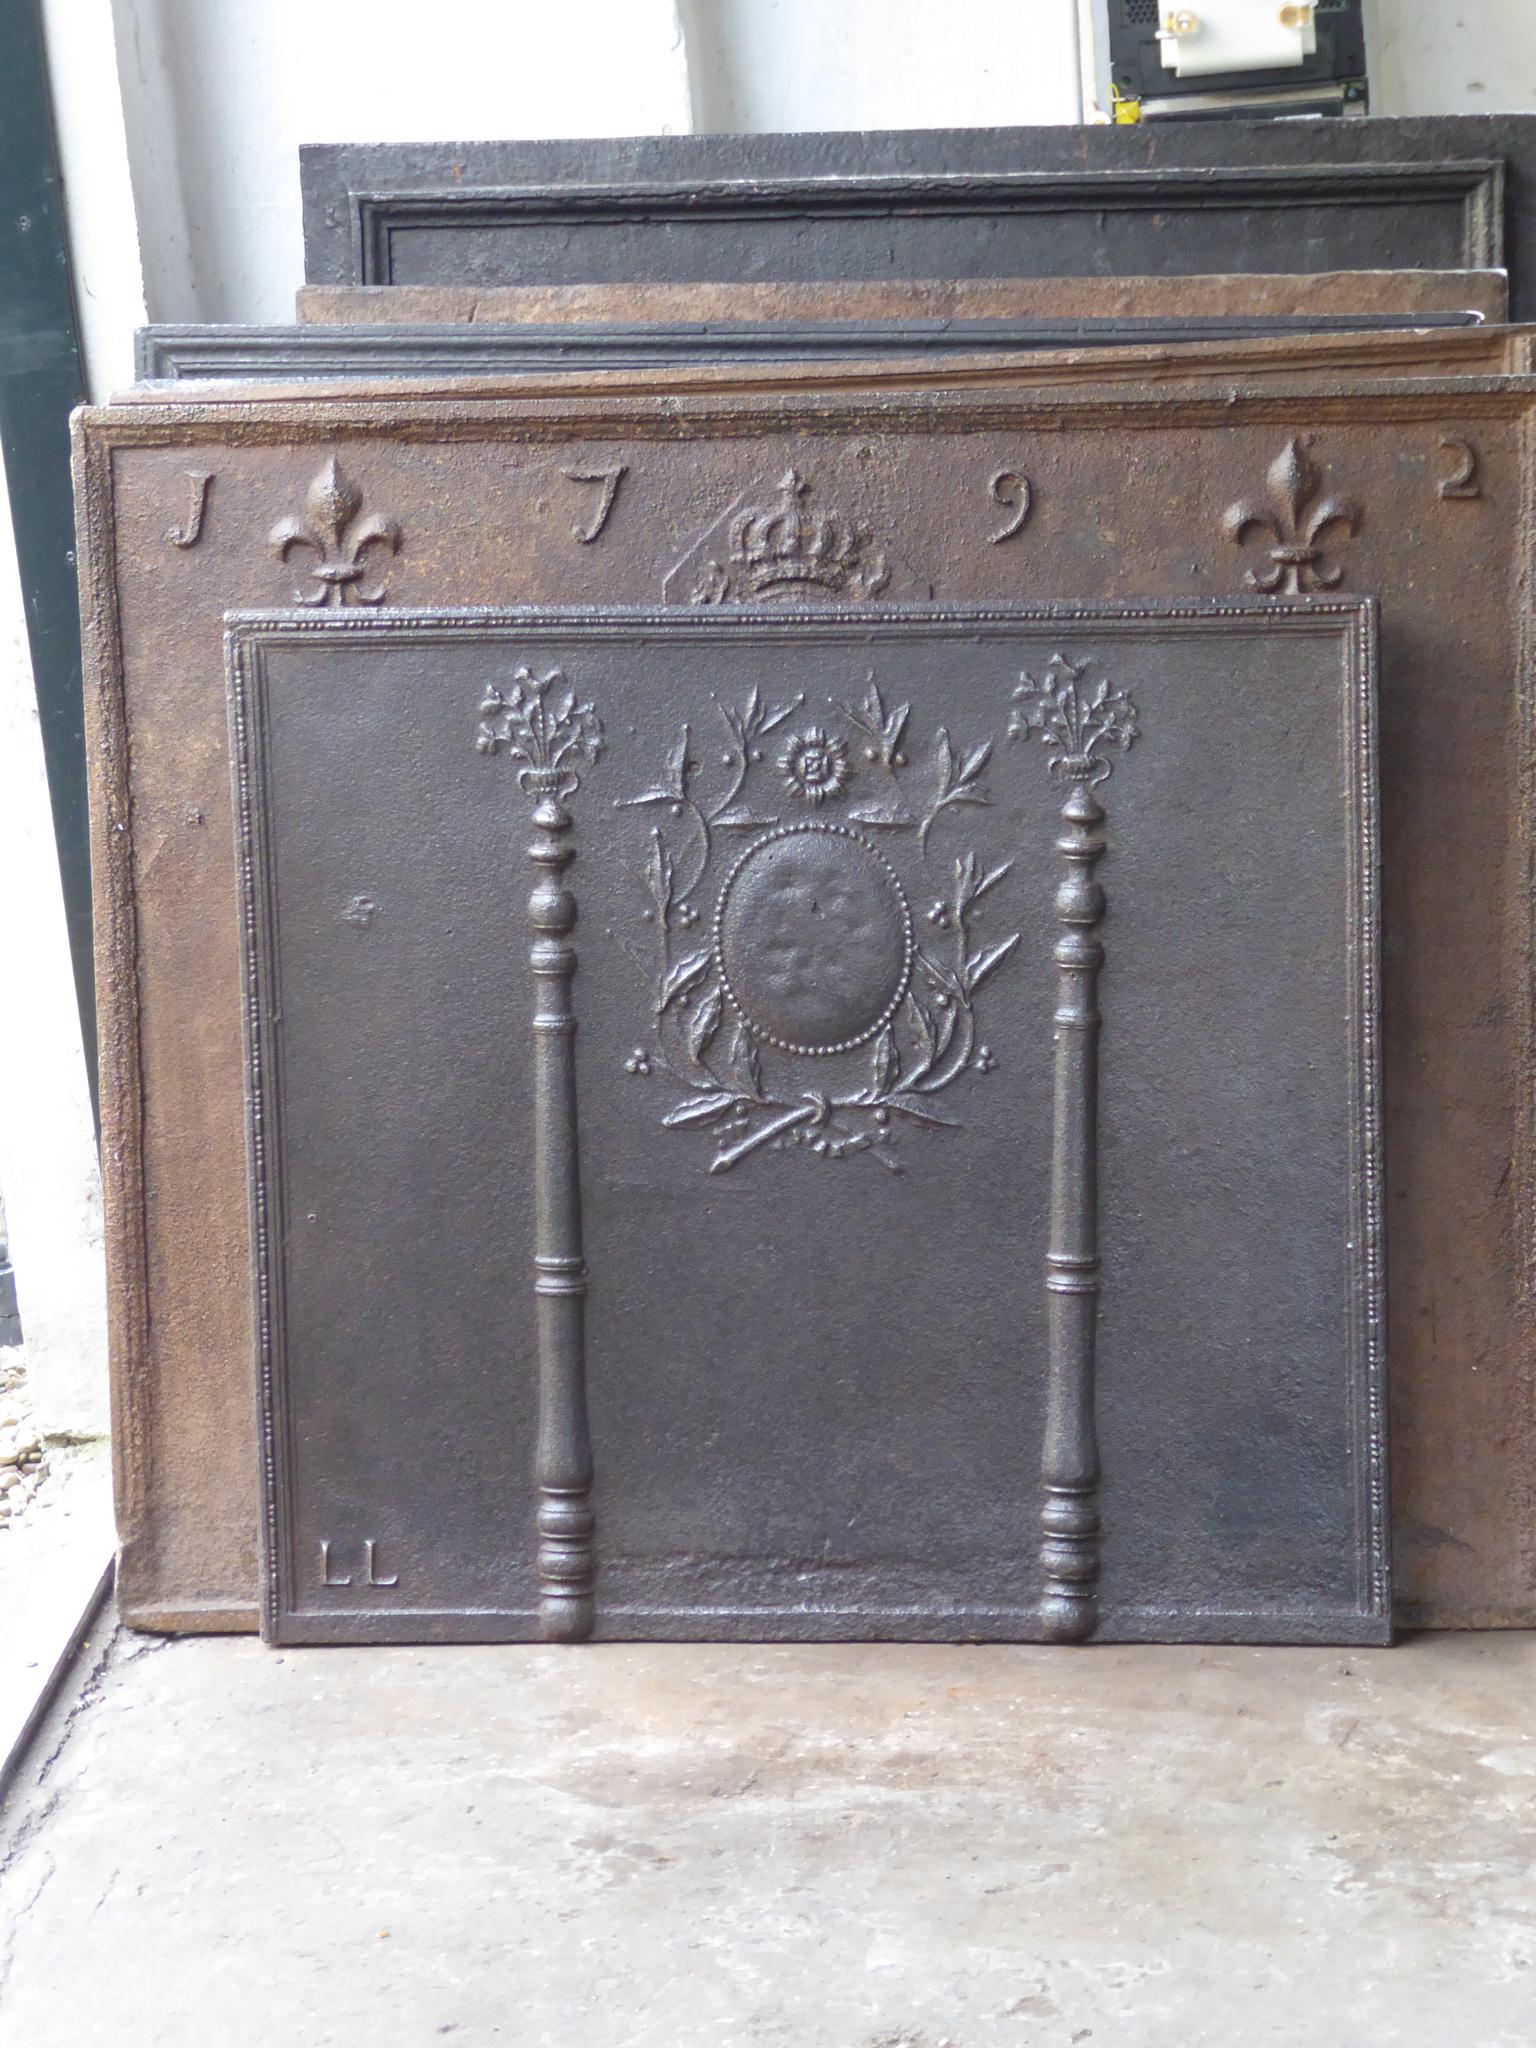 Late 18th or early 19th century French neoclassical fireback with two pillars of freedom. The pillars symbolize the value liberty, one of the three values of the French revolution. 

The fireback is made of cast iron and has a natural brown patina.